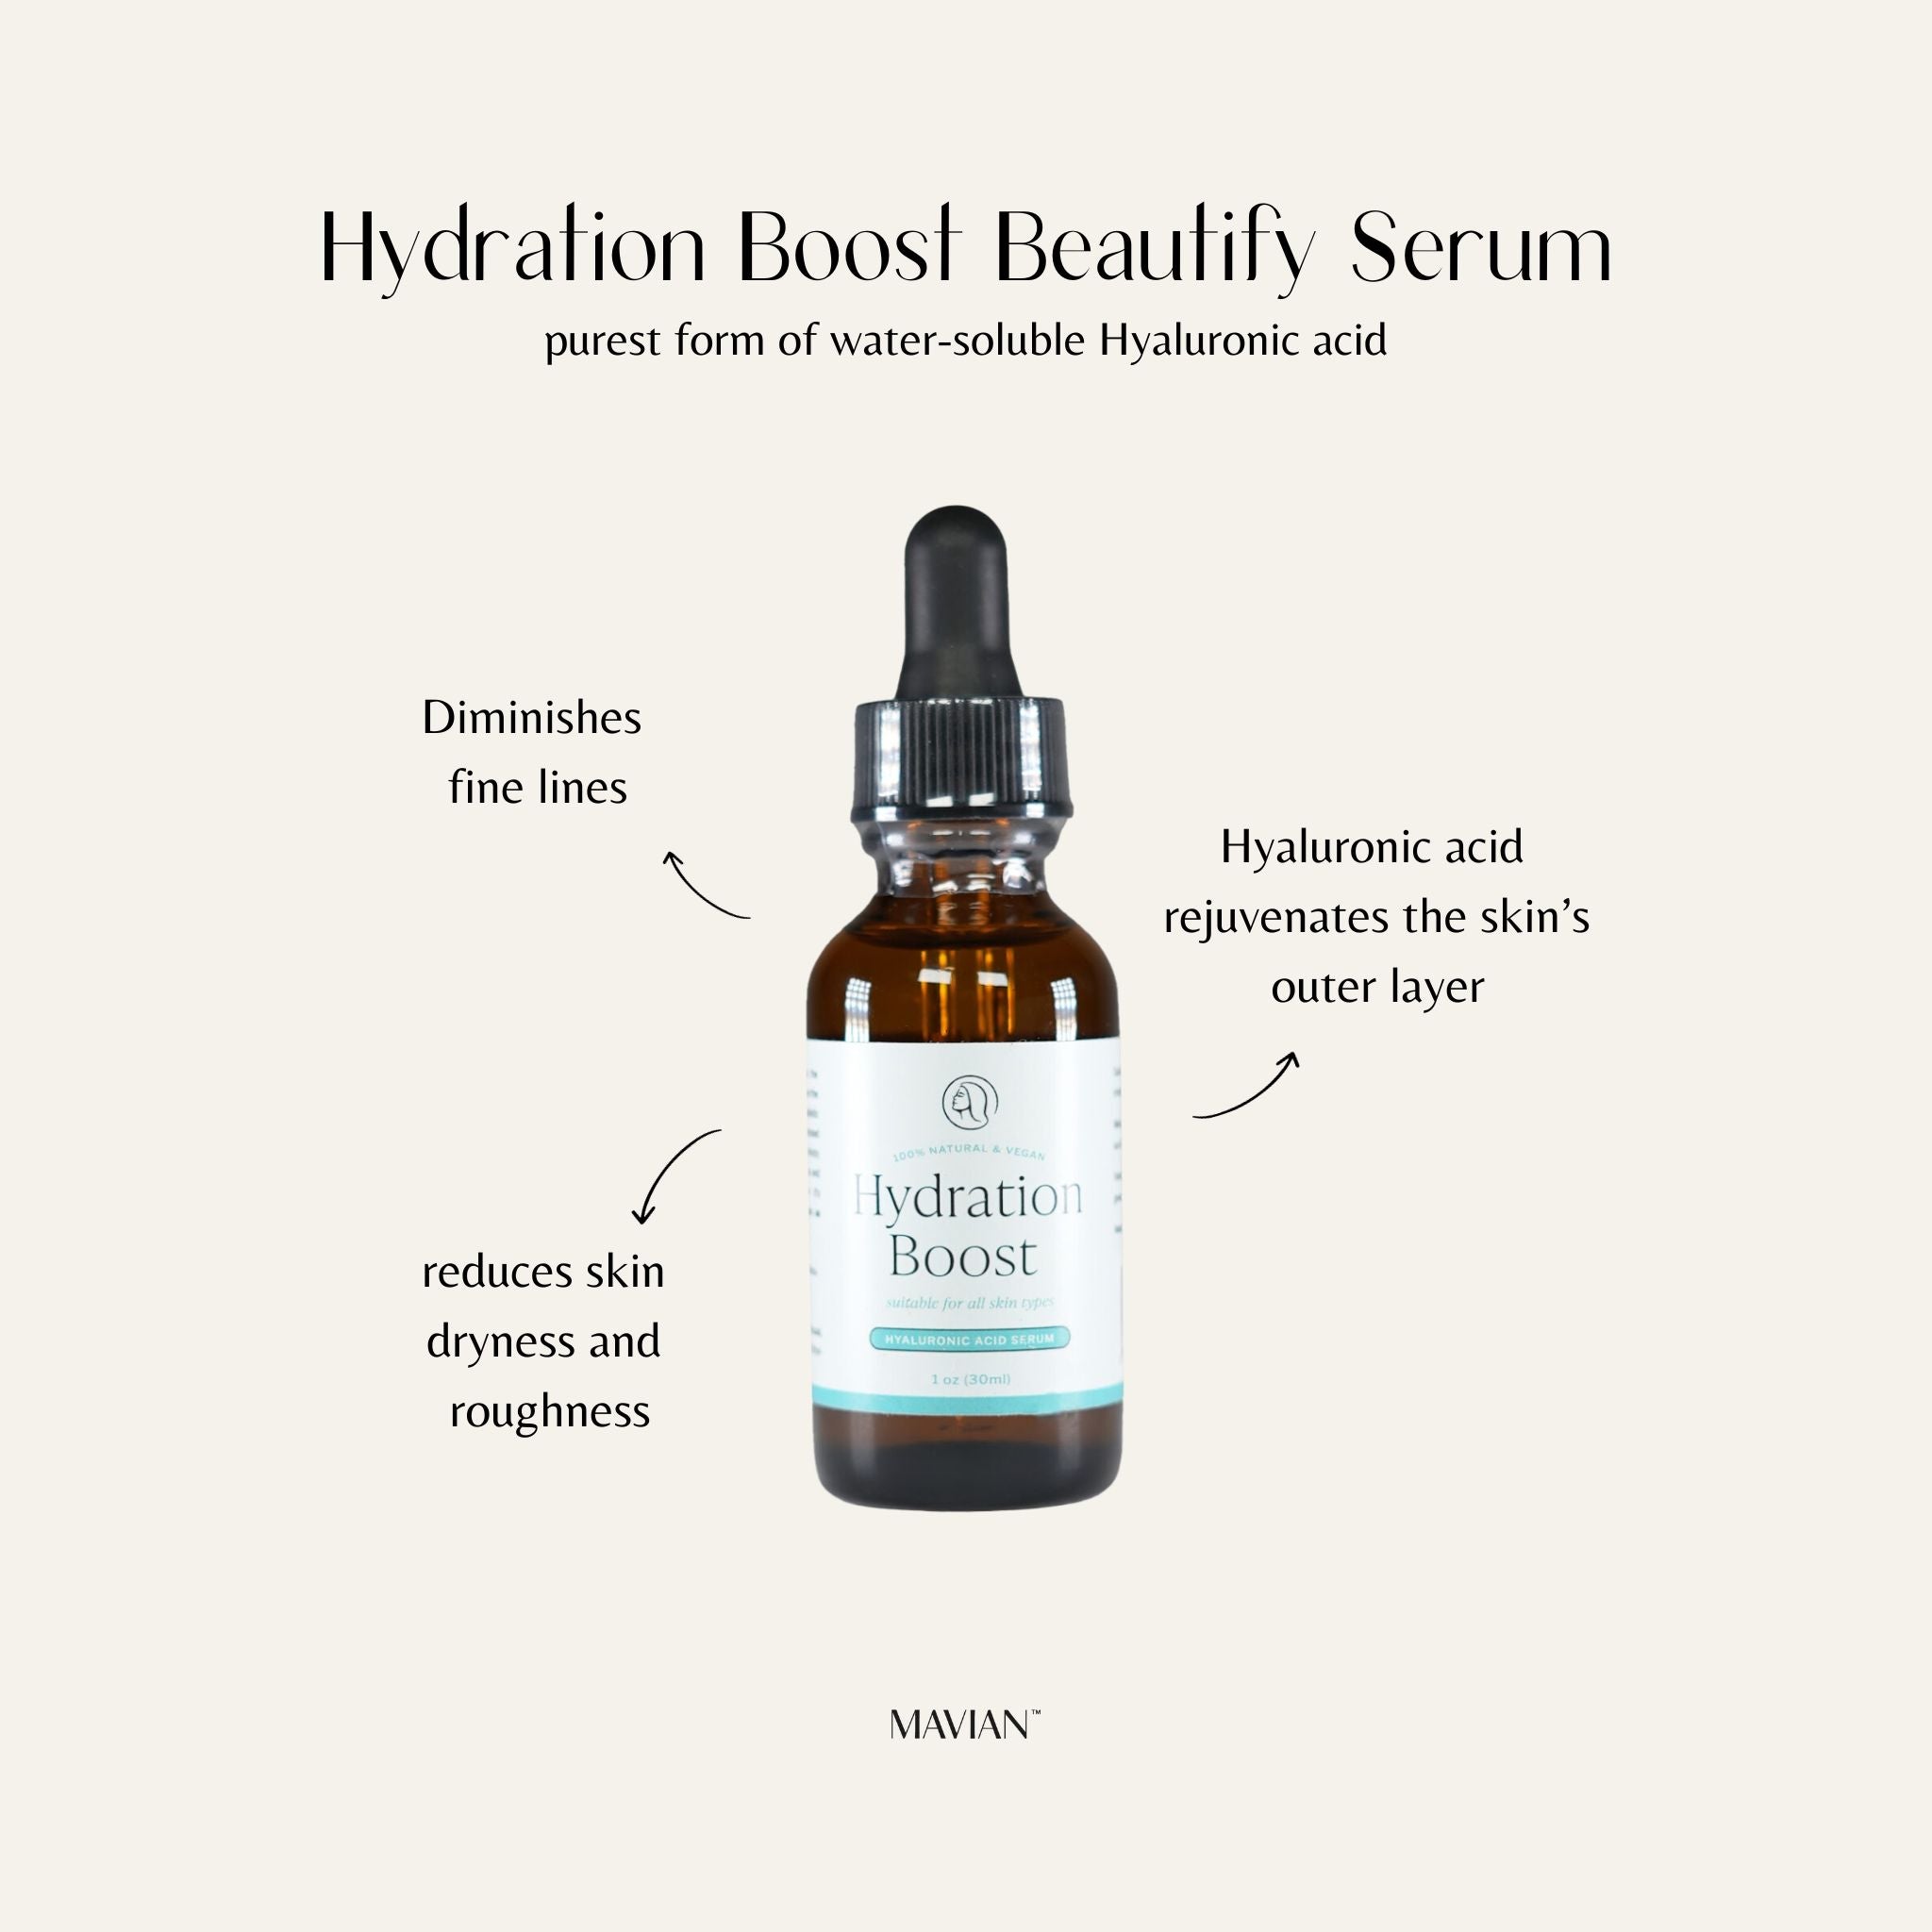 Hydration Boost Serum include: disminishes fine lines, hyaluronic acid, reduces skin dryness